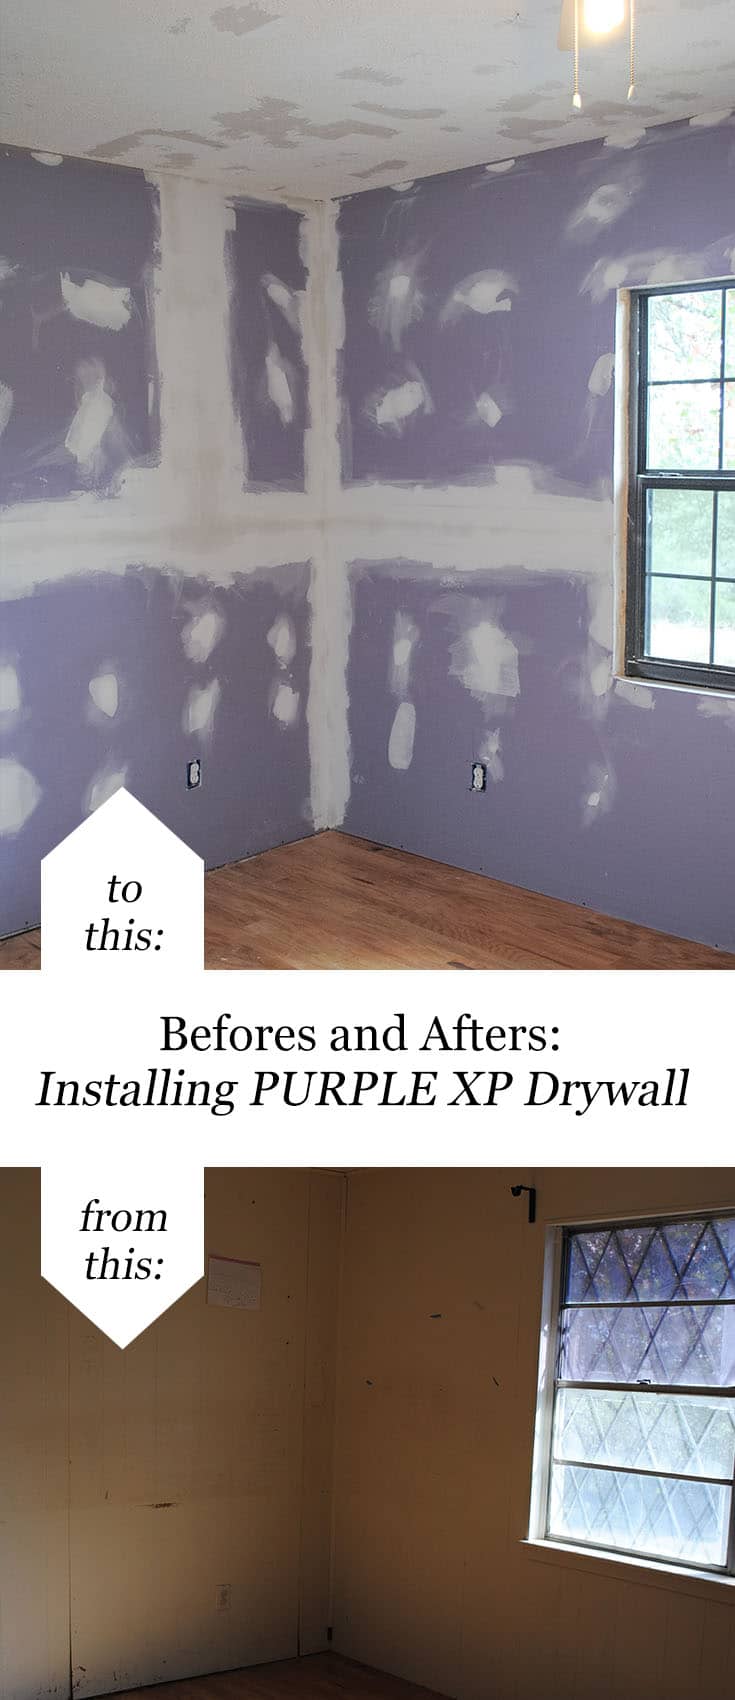 San Antonio lifestyle blogger, Cris Stone, shows off how amazing her kids' room looks (and SOUNDS) amazing thanks to the @AskForPURPLE XP drywall expertly installed by Joe and his crew over at Bexar Essentials Remodeling. #ad #IC #AskForPURPLE